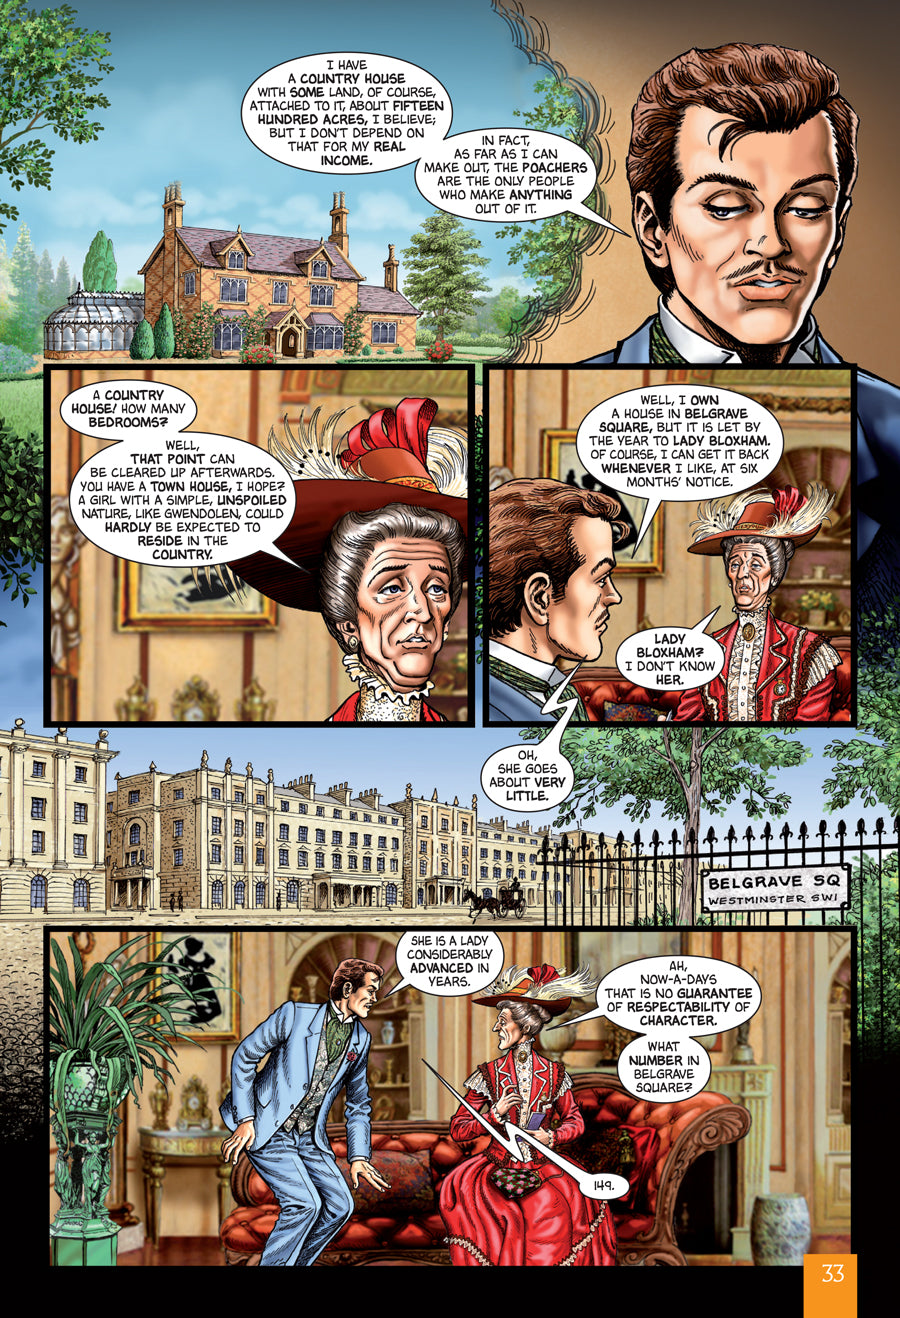 A sample Original Text interior page from The Importance of Being Earnest.